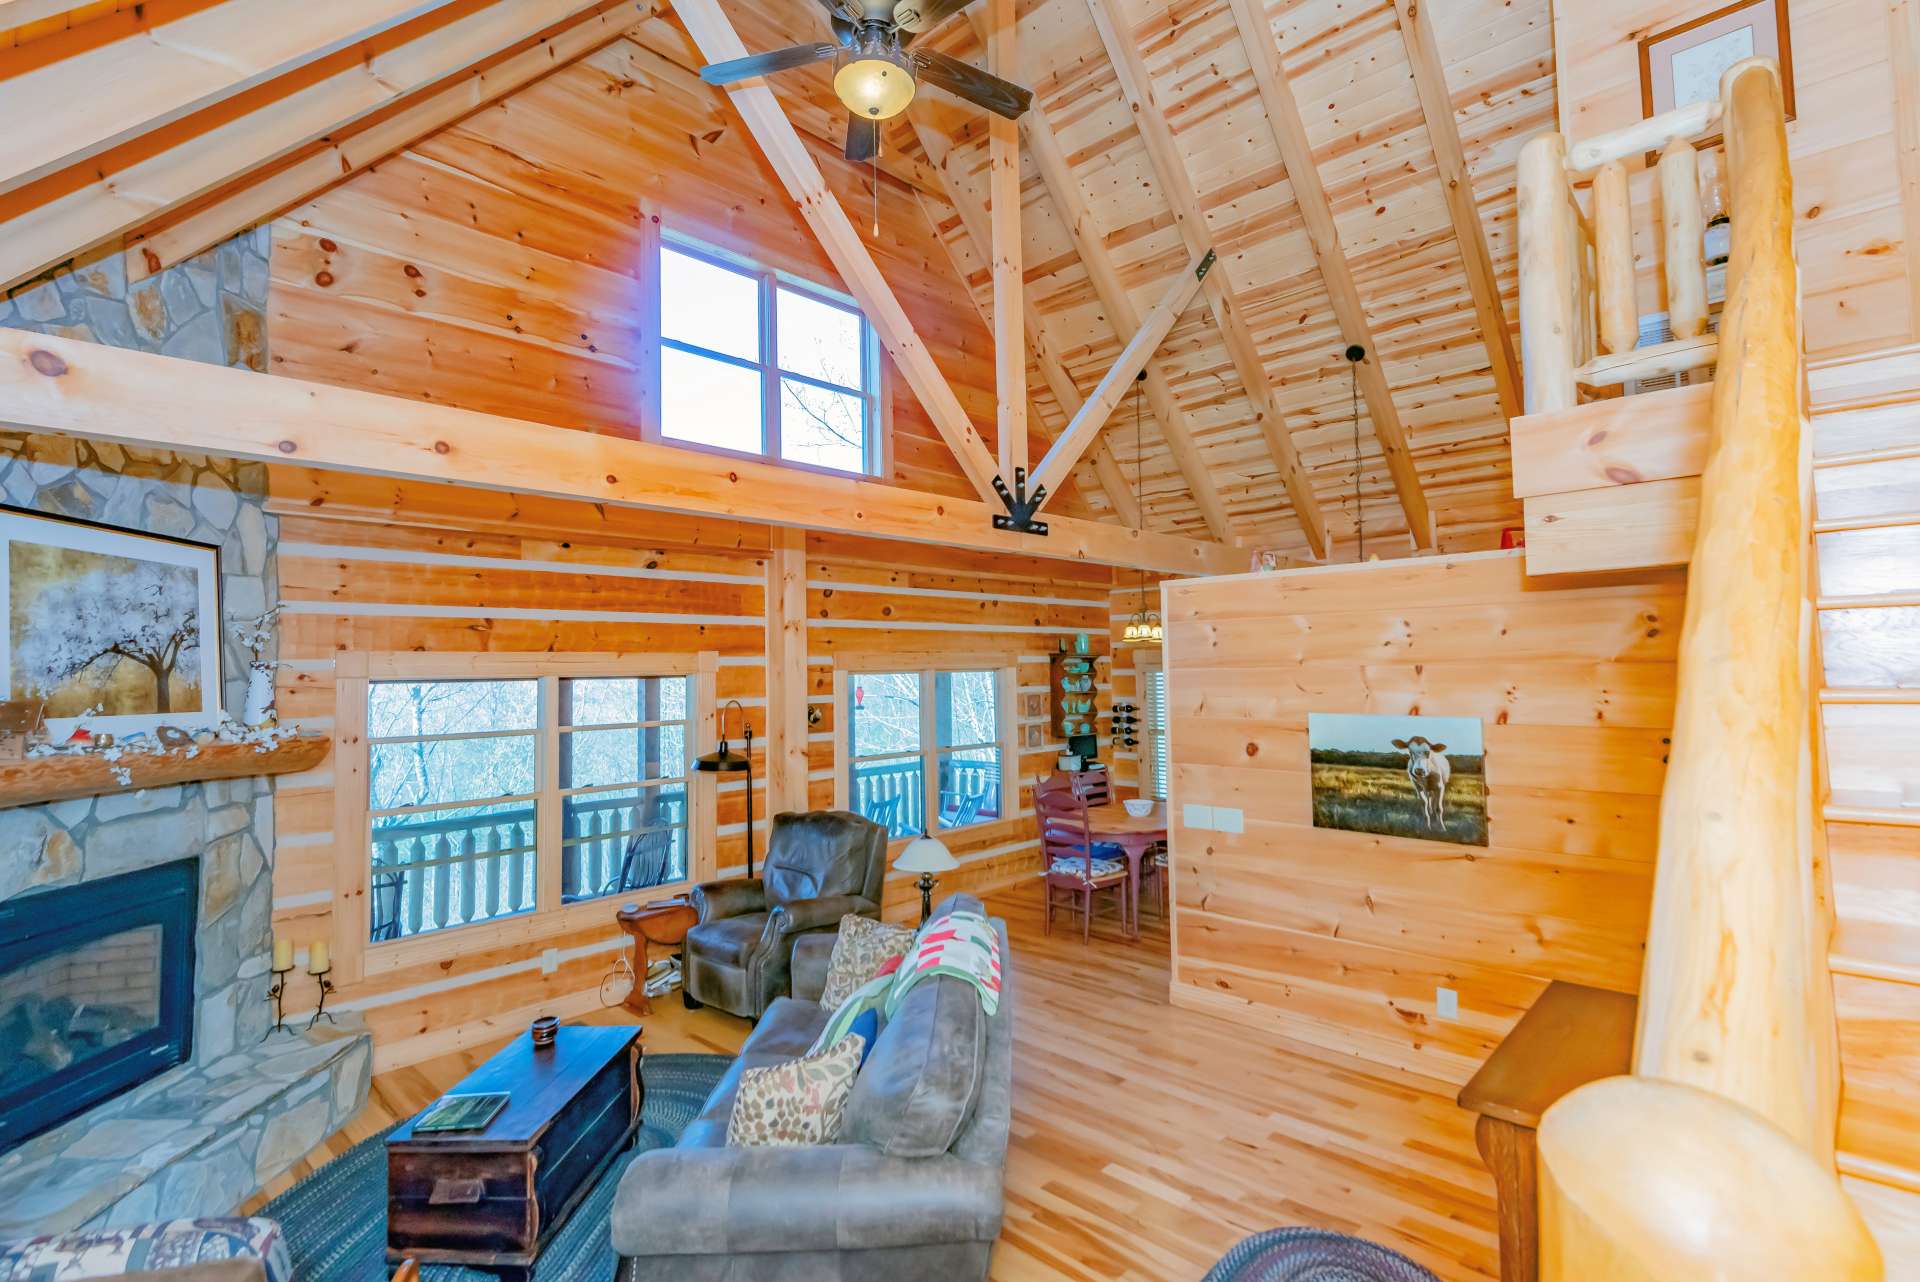 The great room offers high vaulted ceiling with exposed beams, and lots of windows filling the cabin with natural light.